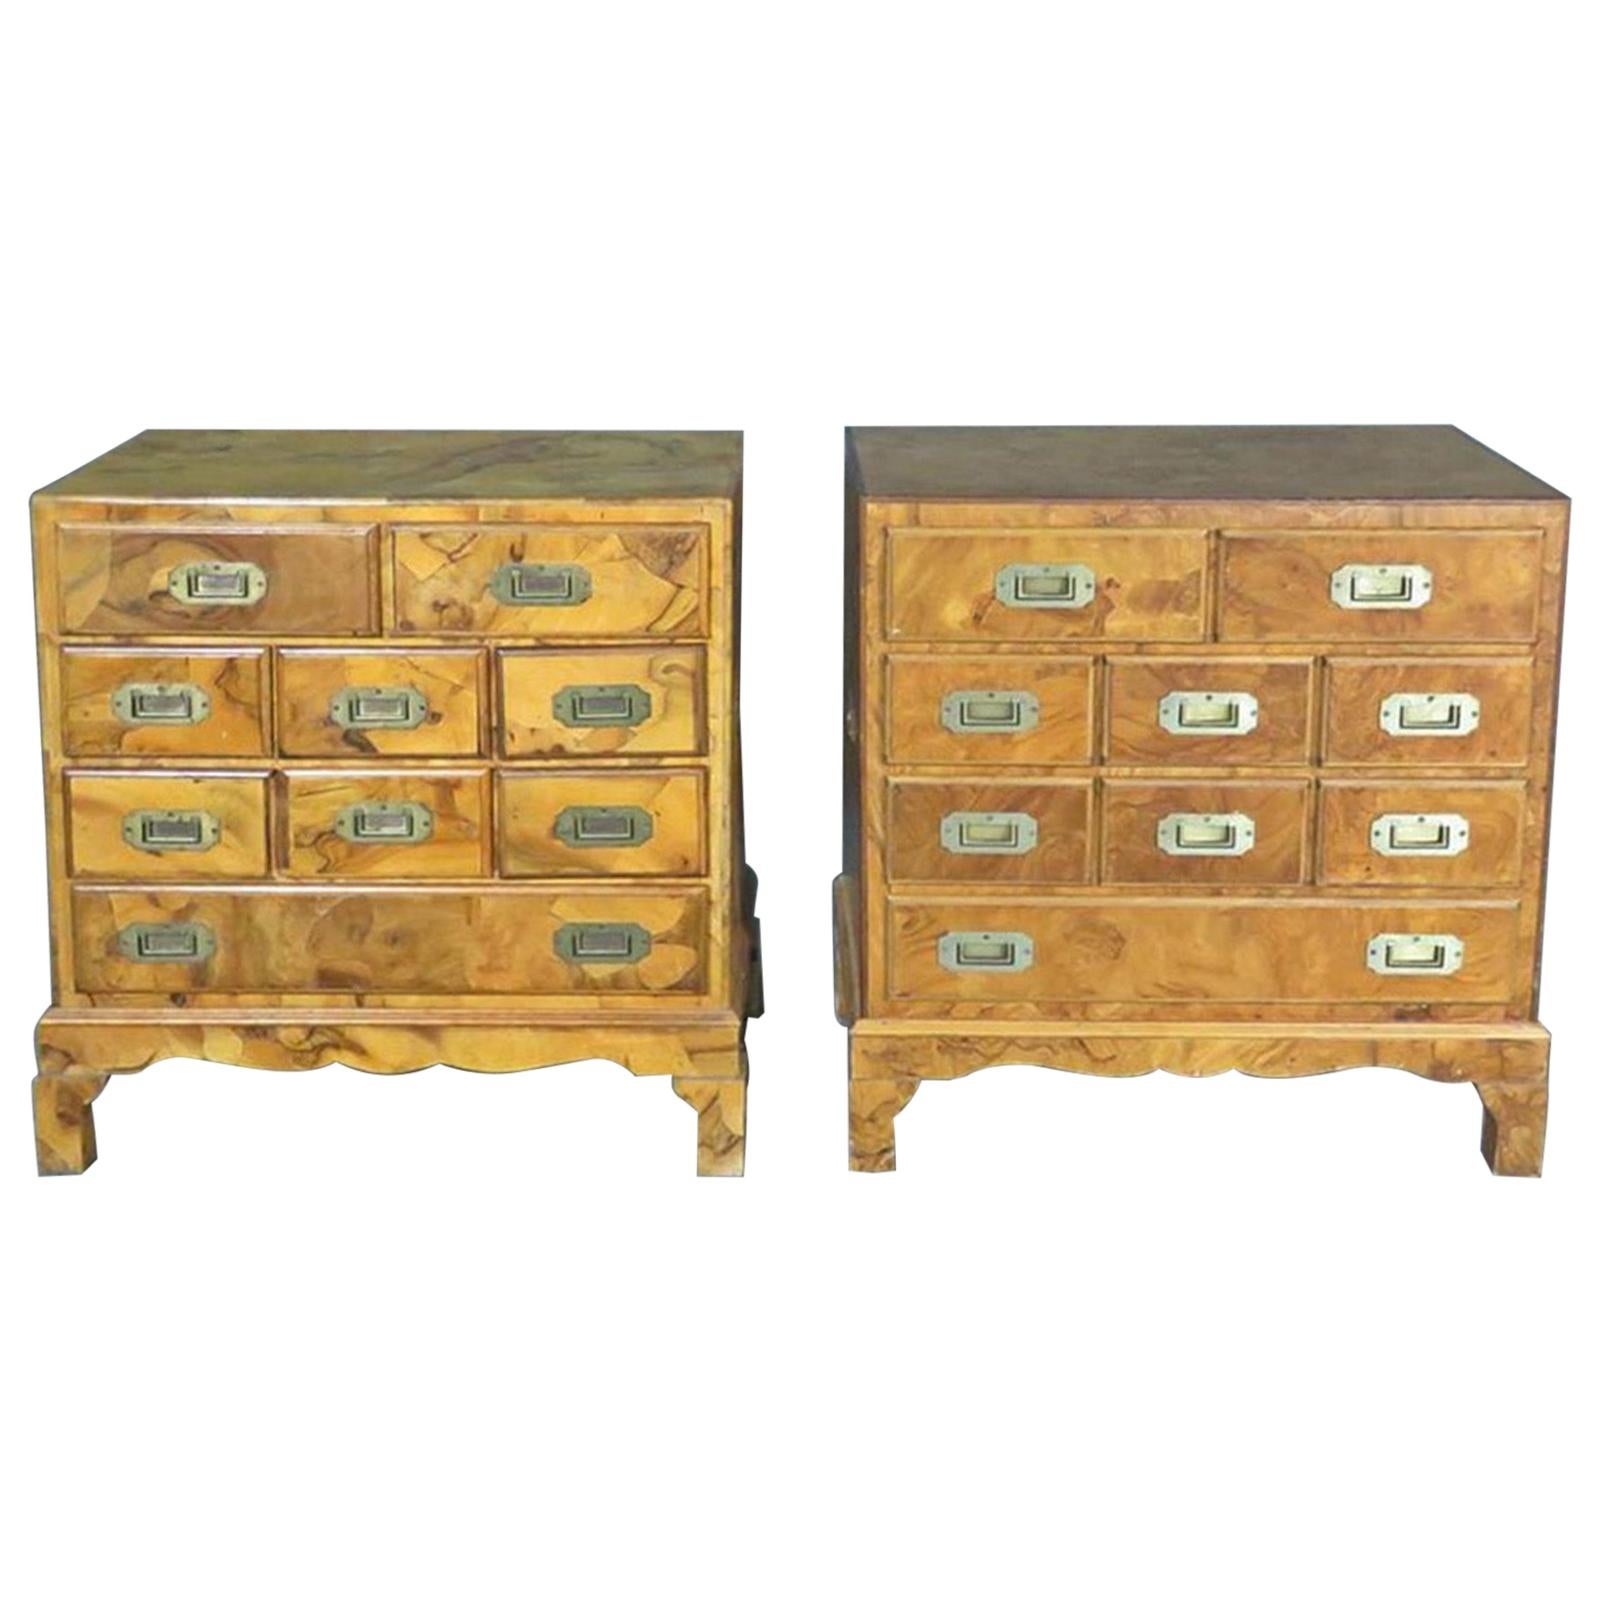 Companion Pair of Bulred Walnut Campaign Style Bachelors Chests Nightstands